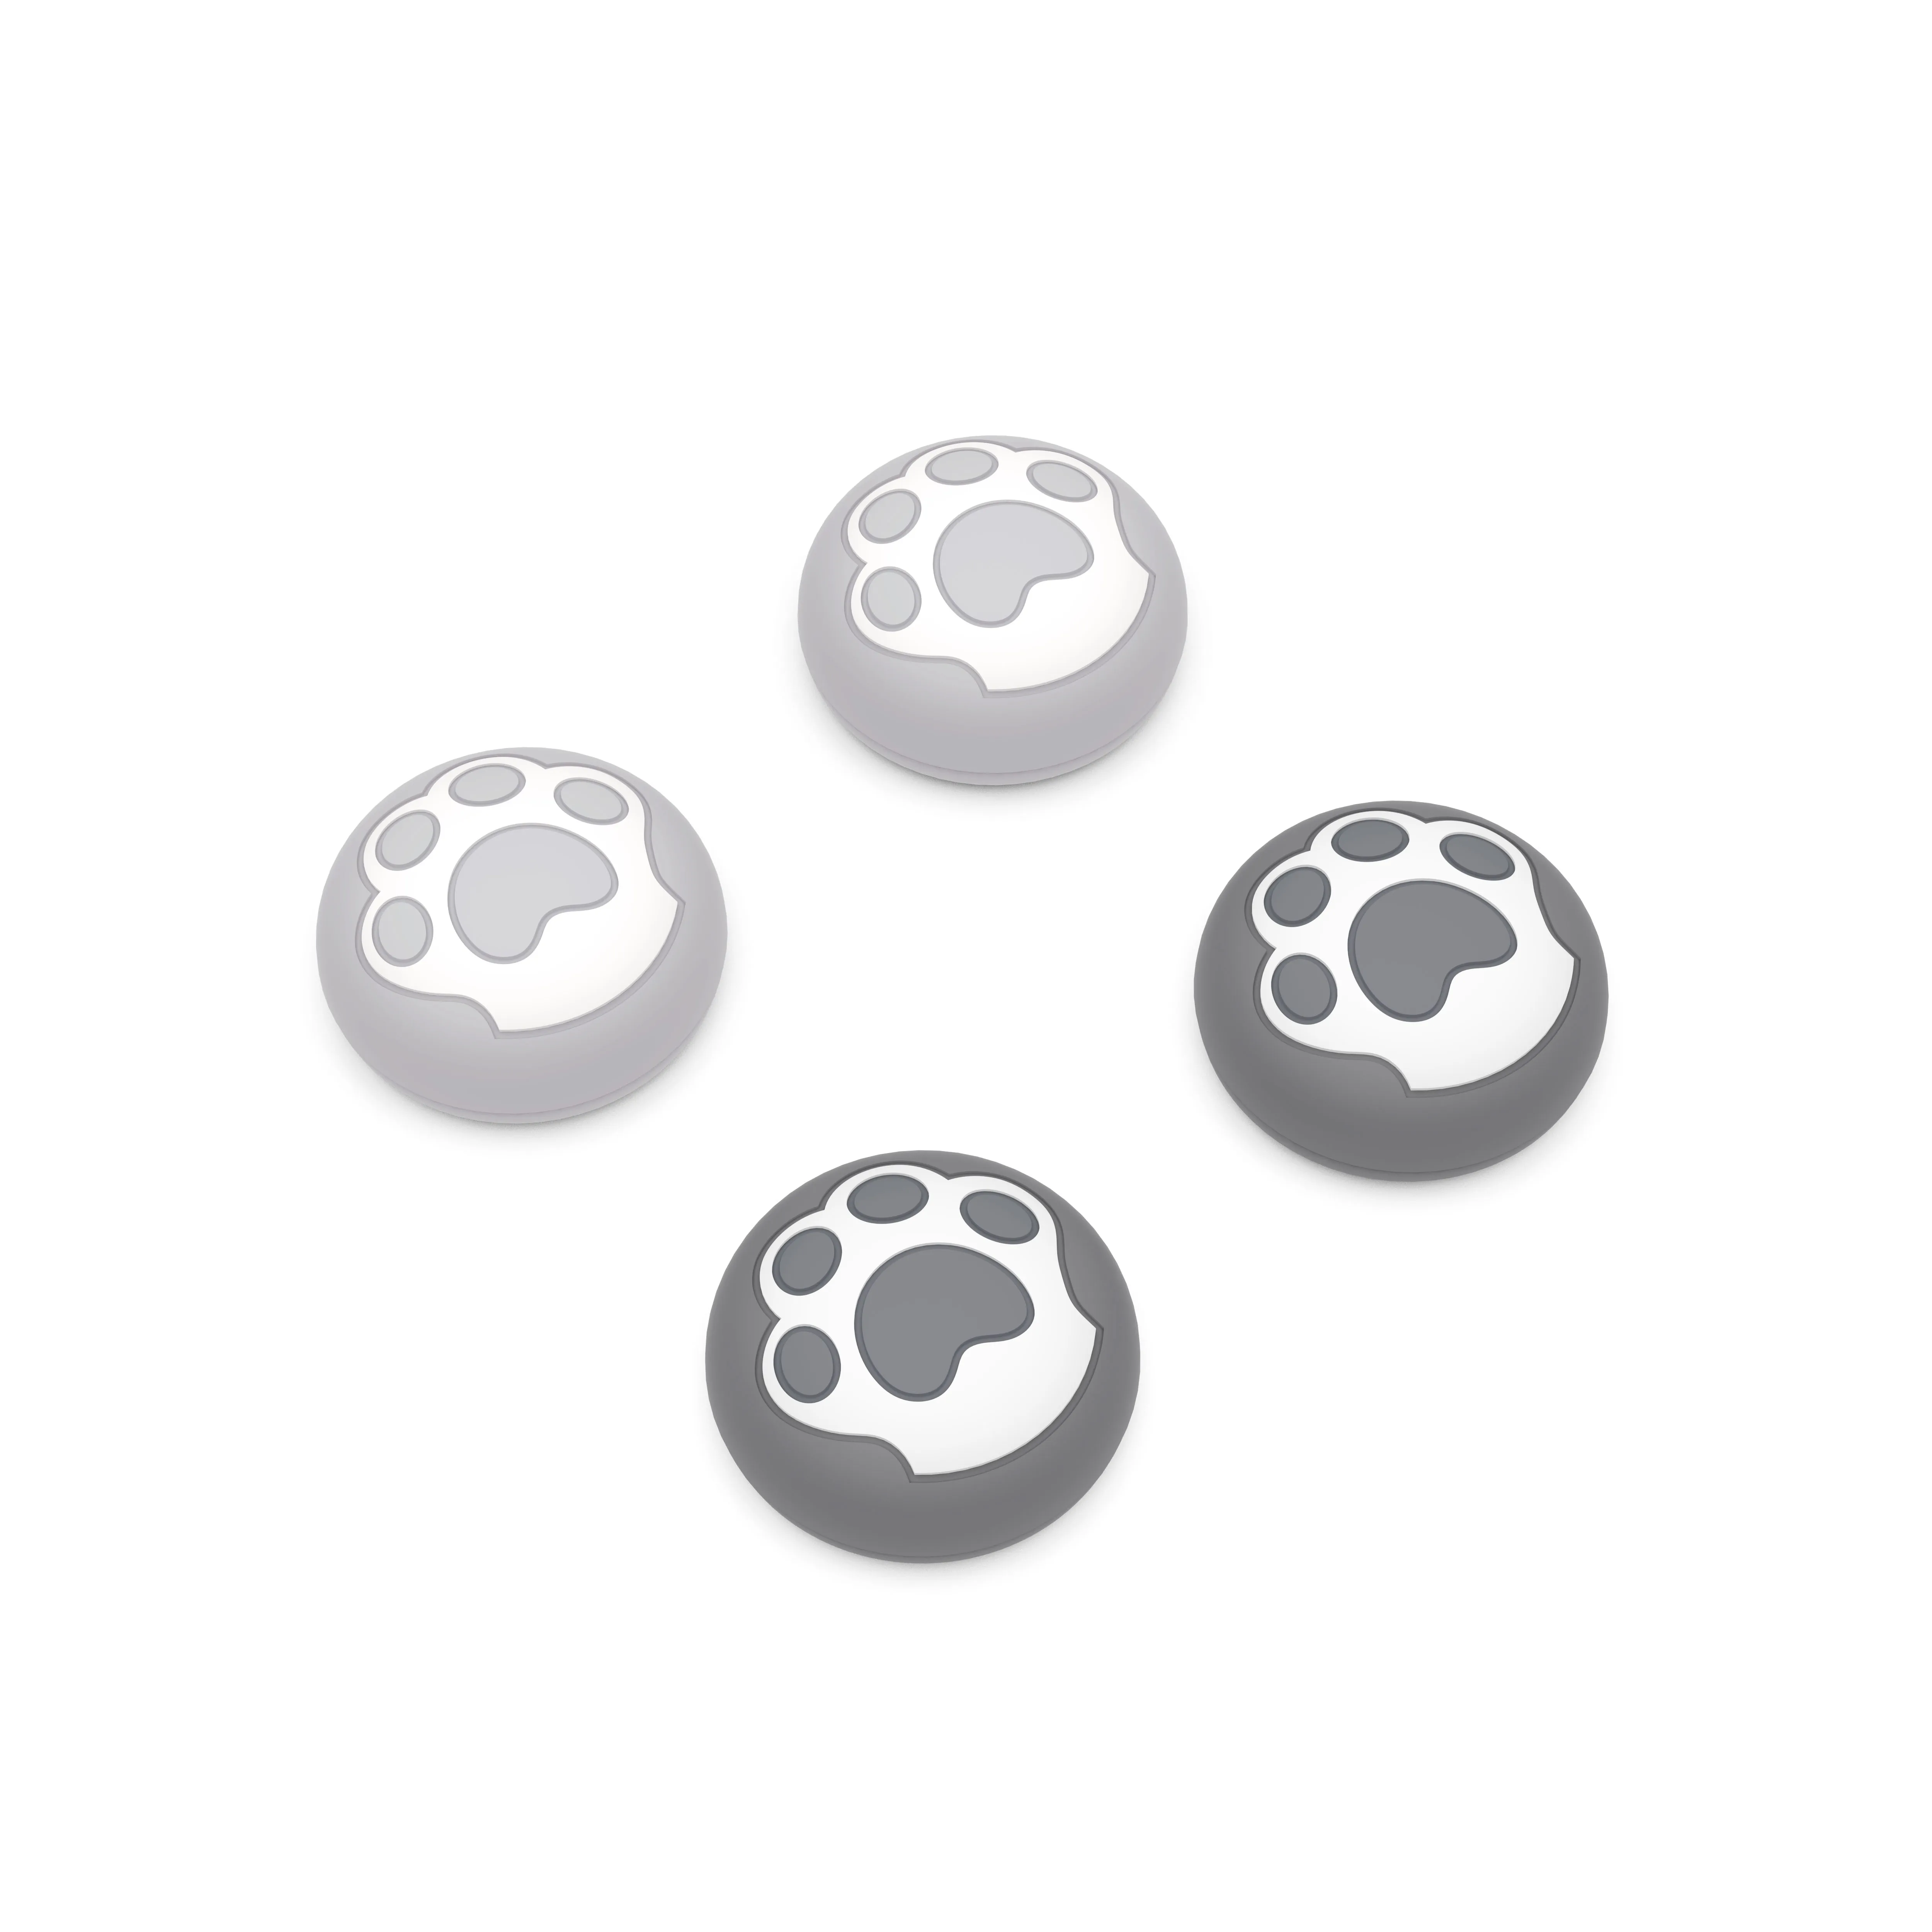 

PlayVital Cat Paw Cute Thumb Grips Joystick Caps for ps5/4, Thumbstick Cover for Xbox Series X/S, for Switch Pro Controller